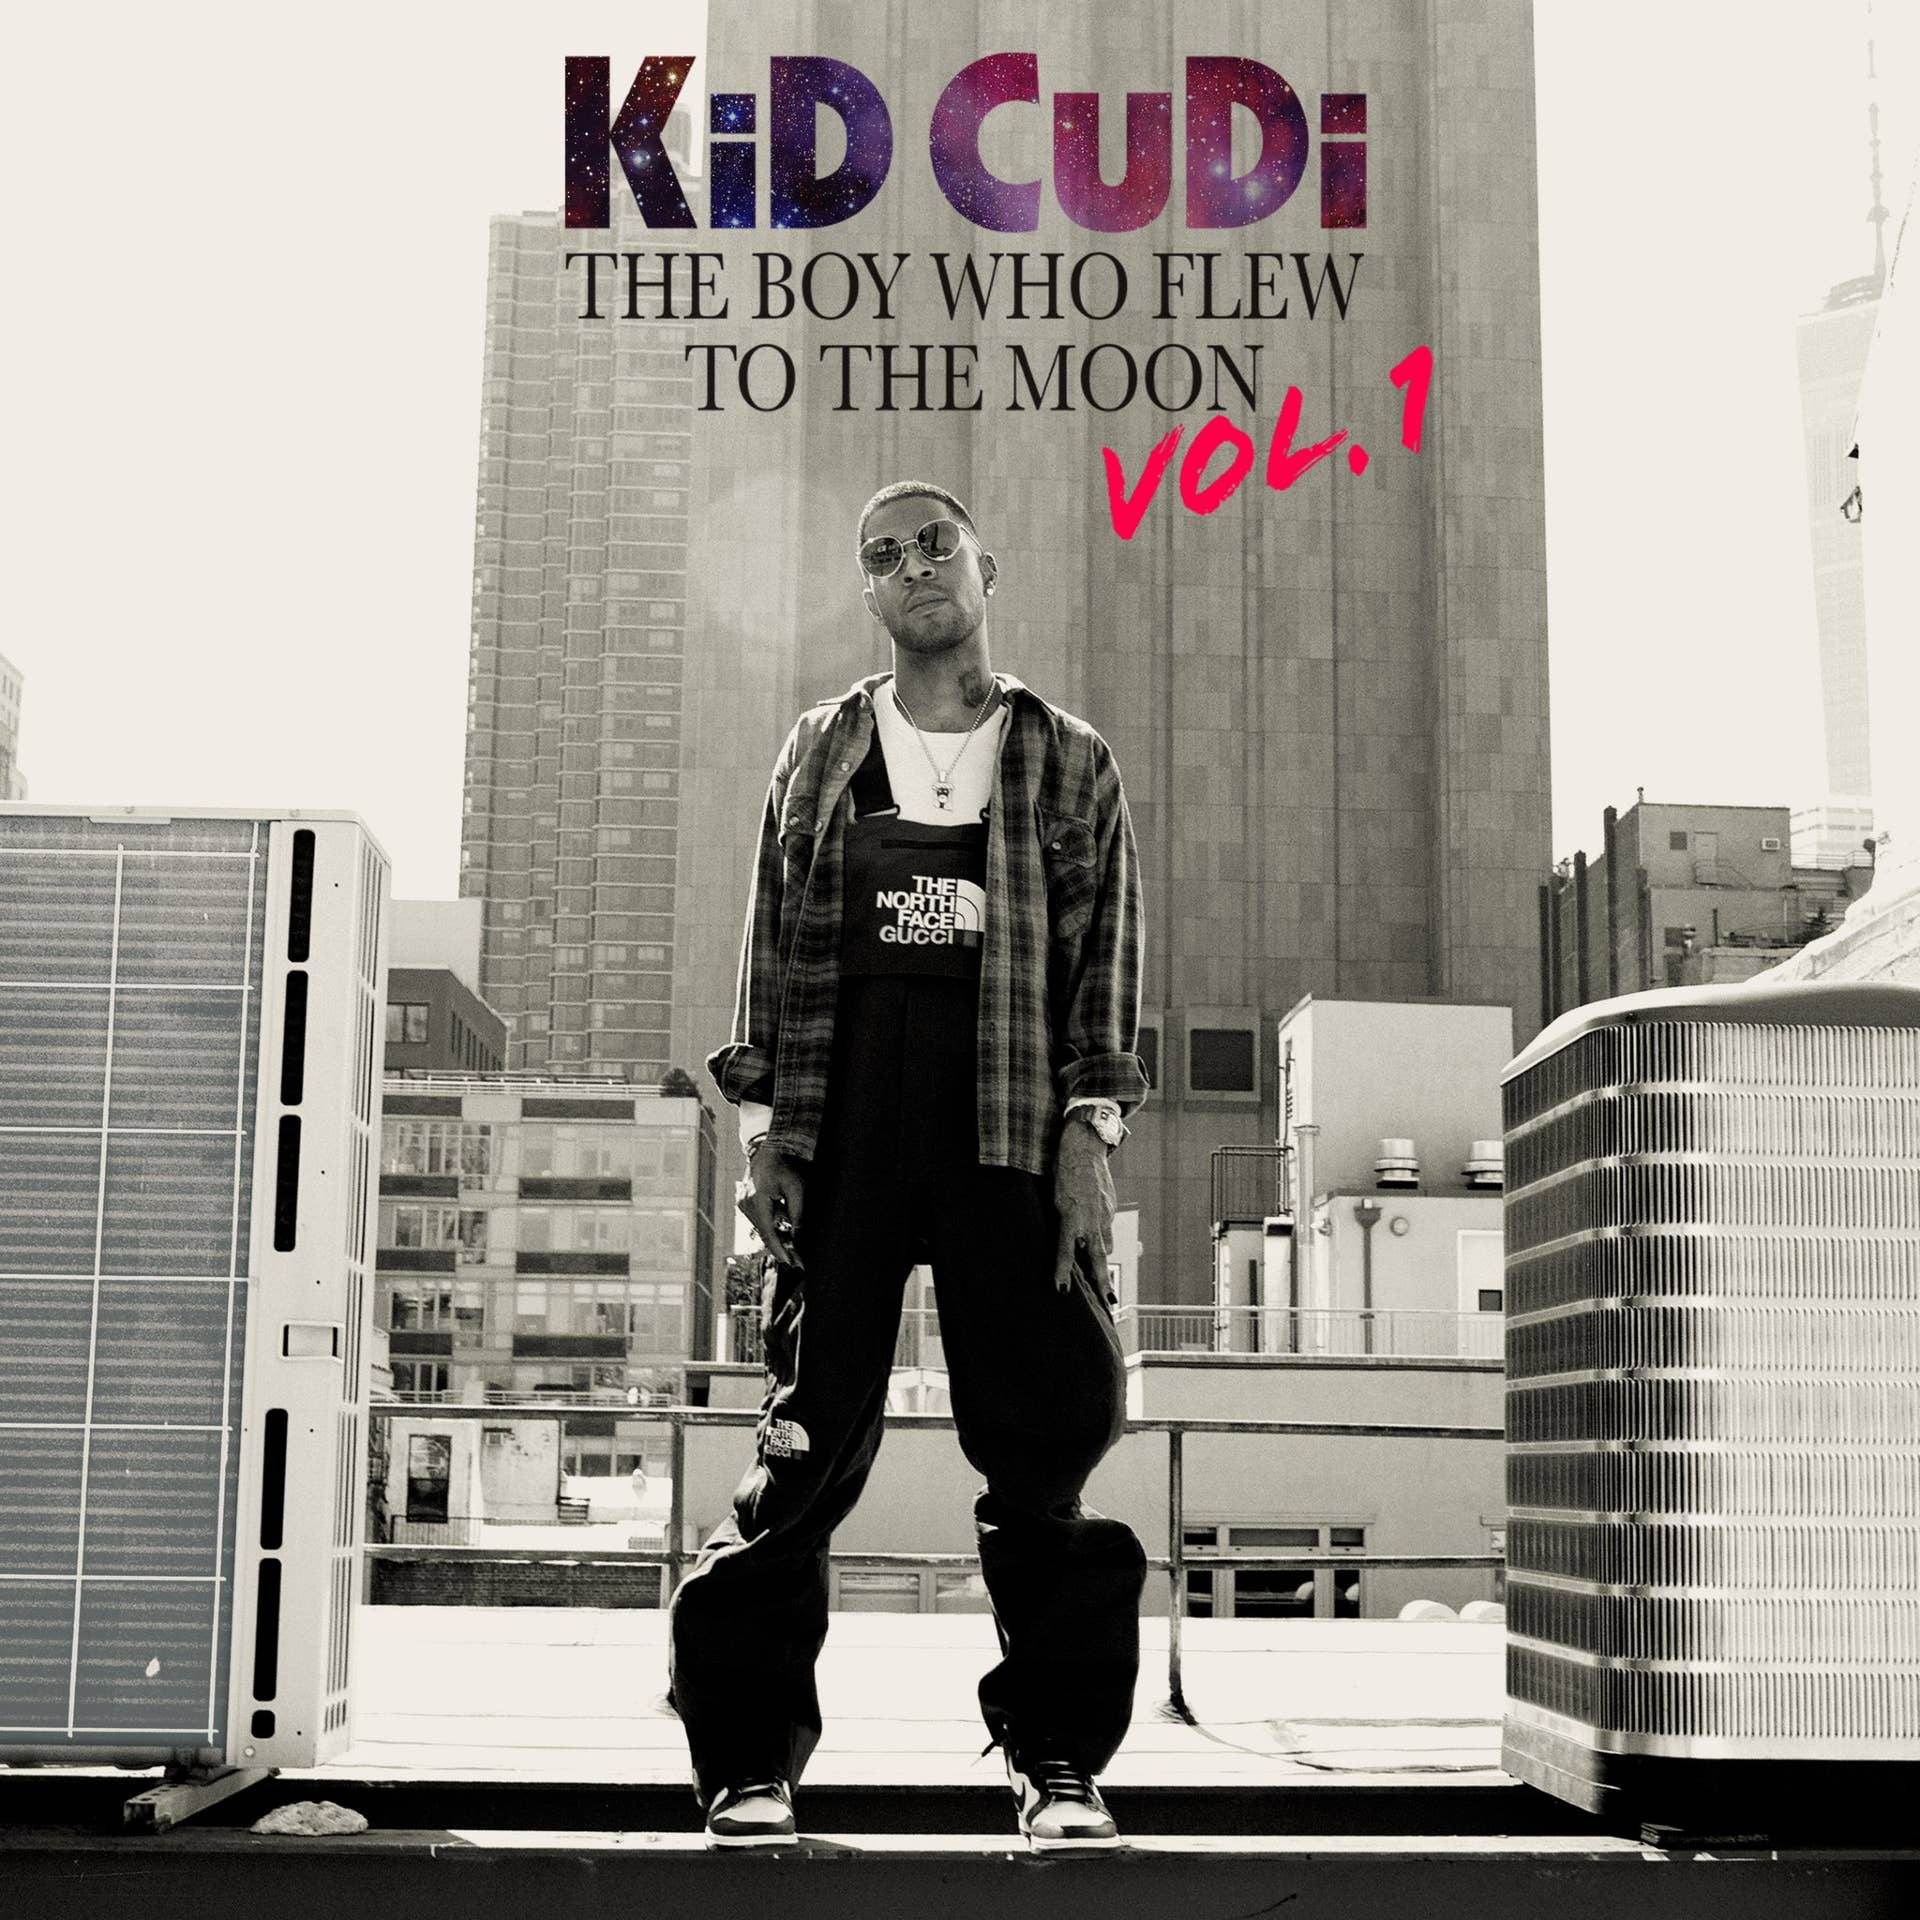 The cover art for a new Kid Cudi compilation is shown